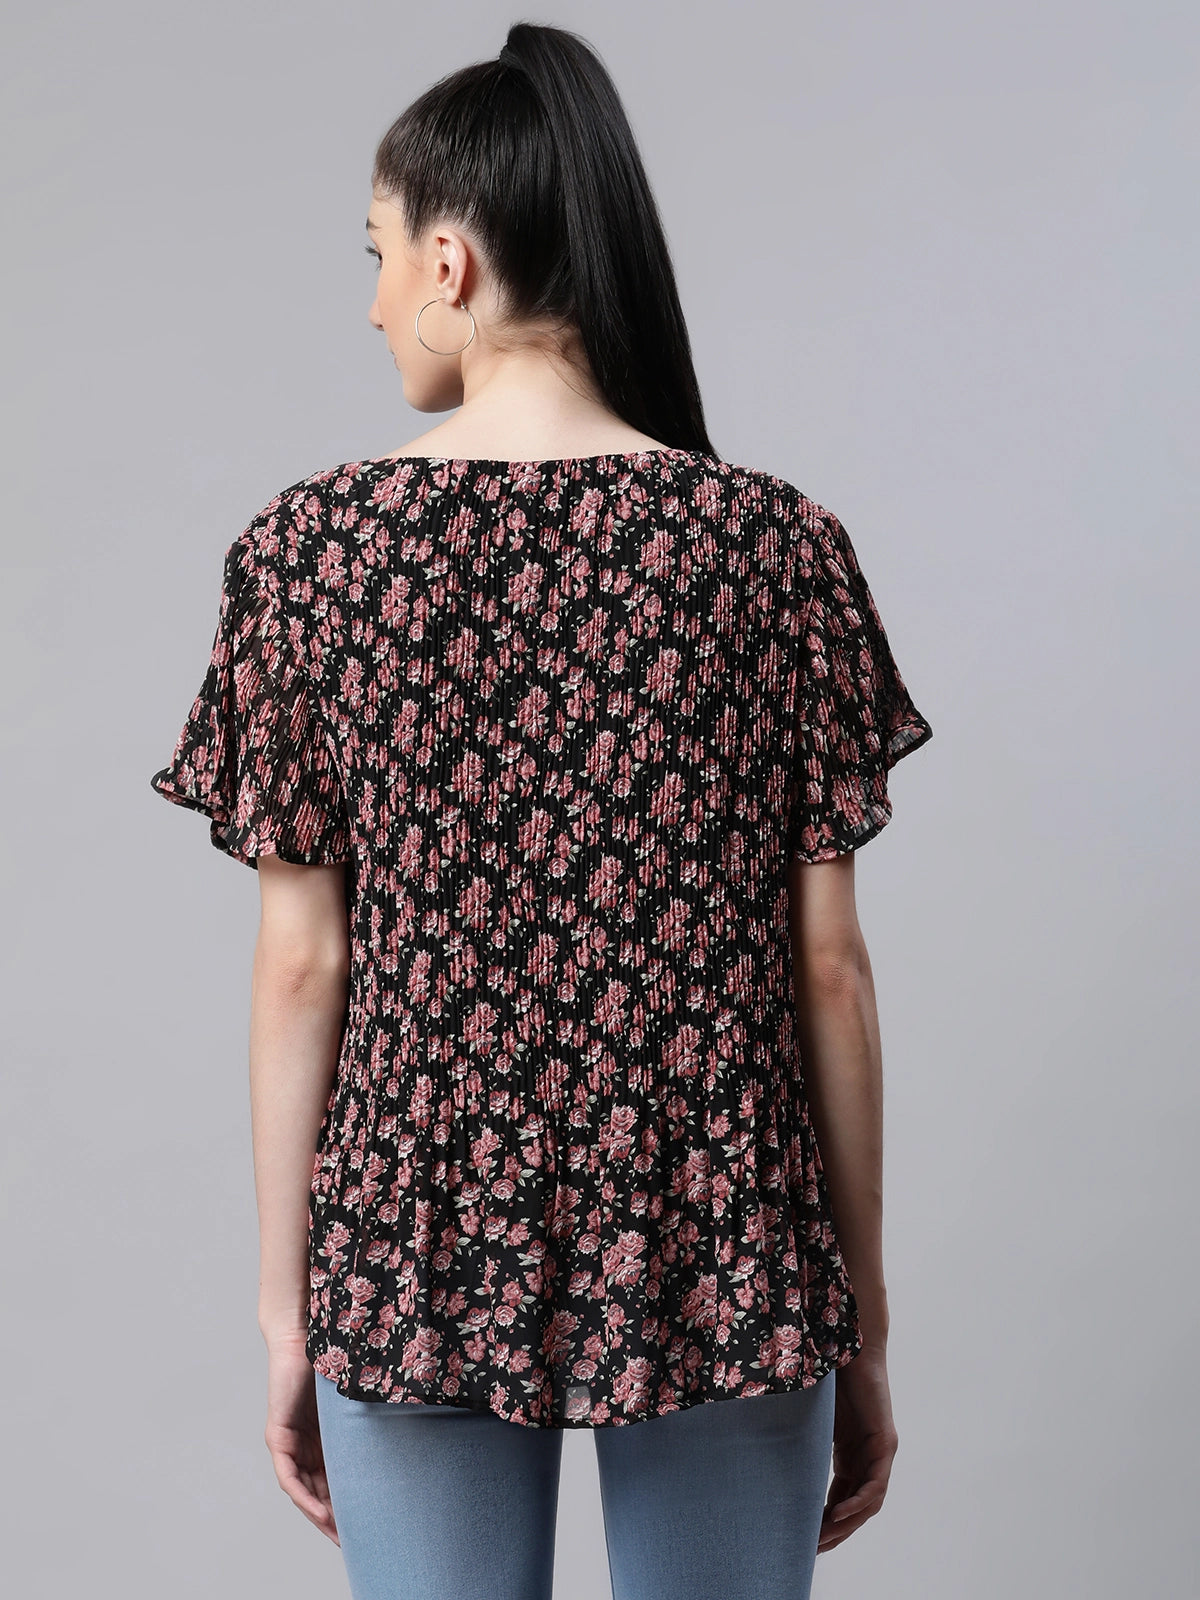 Women Floral Printed Black Loose Fit Party Blouse